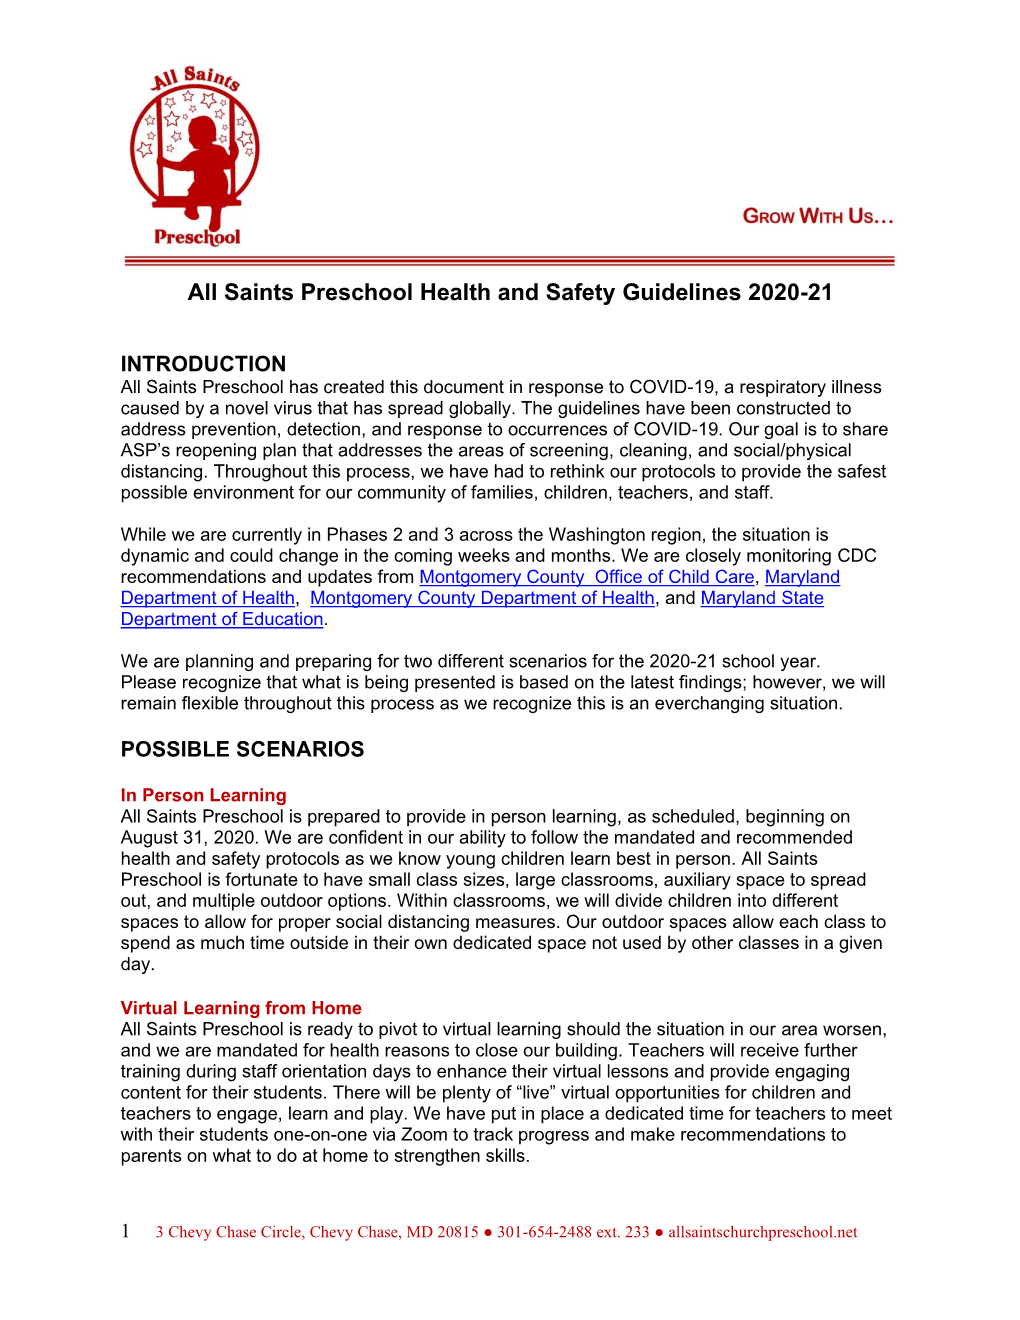 All Saints Preschool Health and Safety Guidelines 2020-21